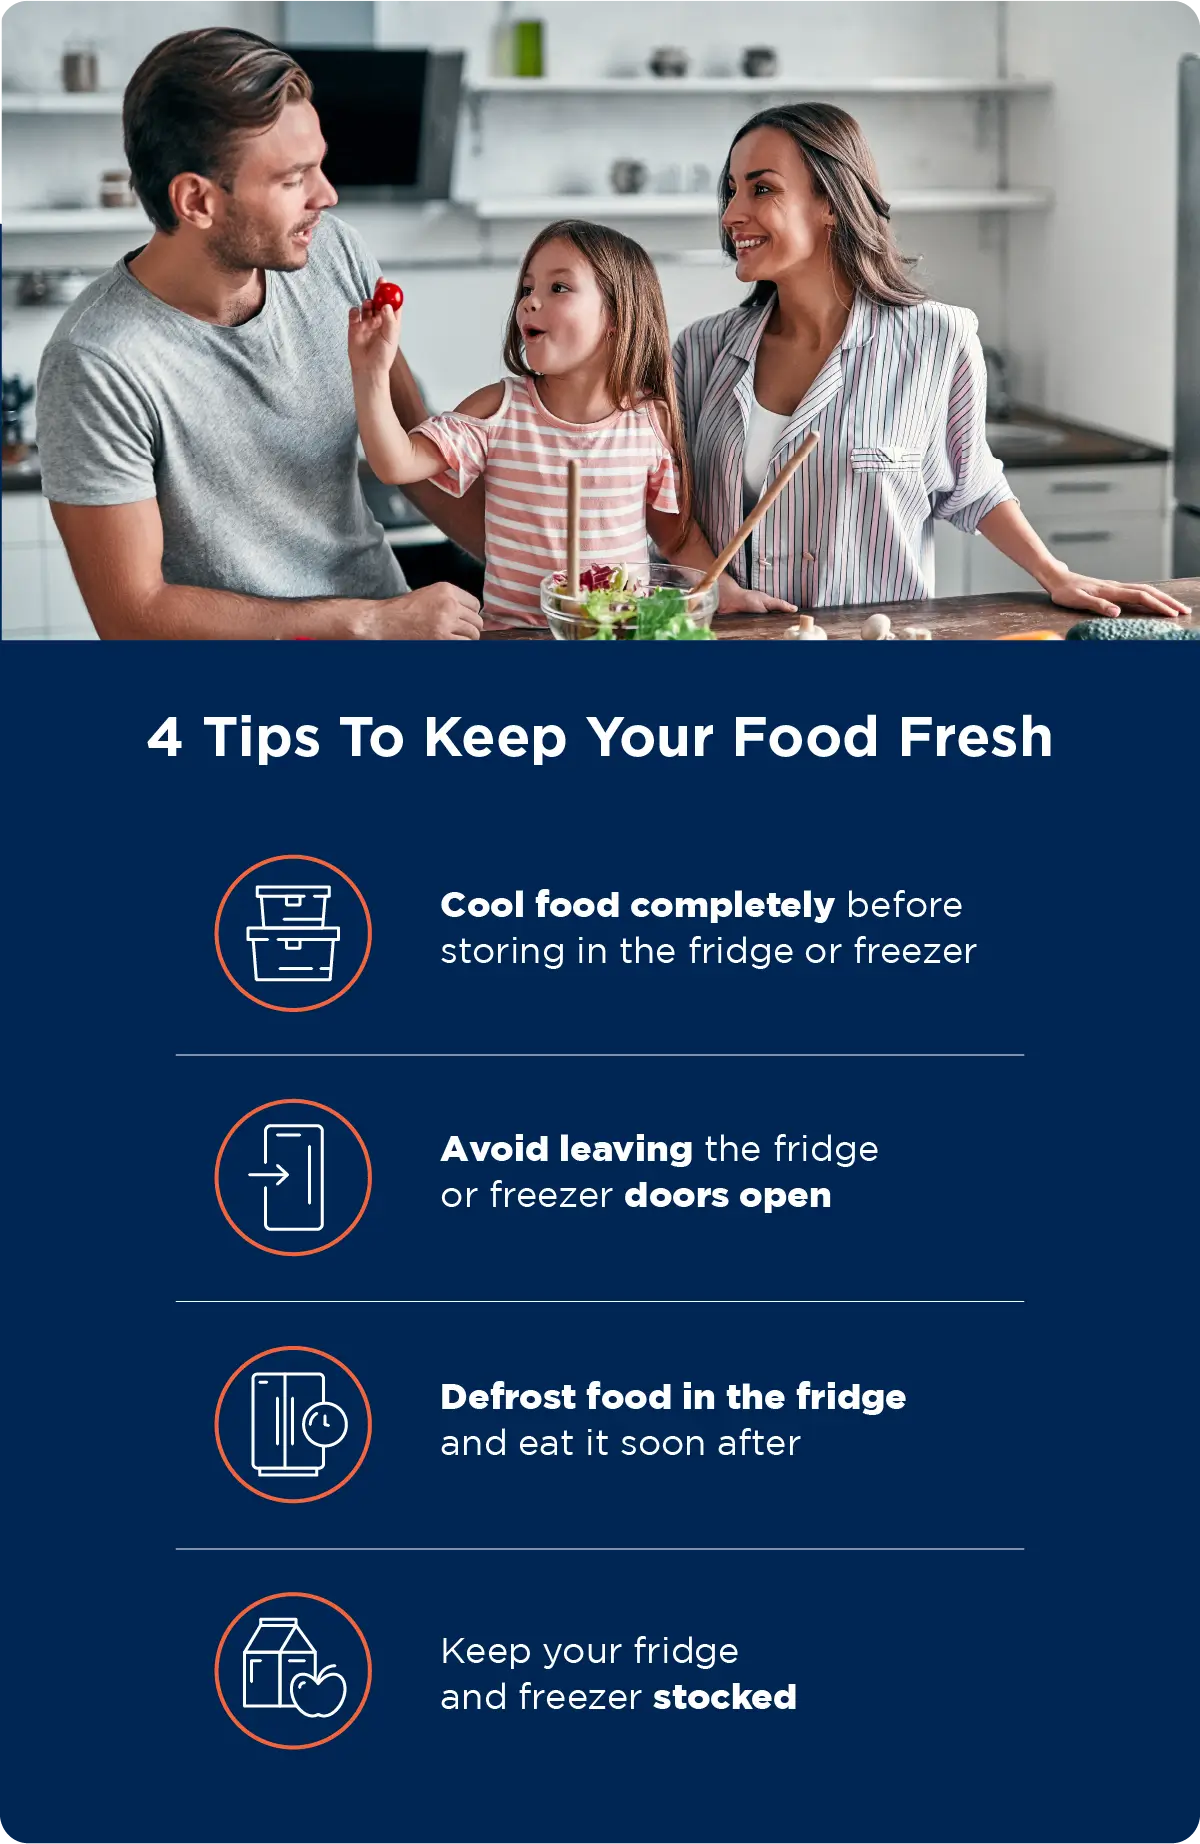 How to keep your food fresh in the fridge and freezer